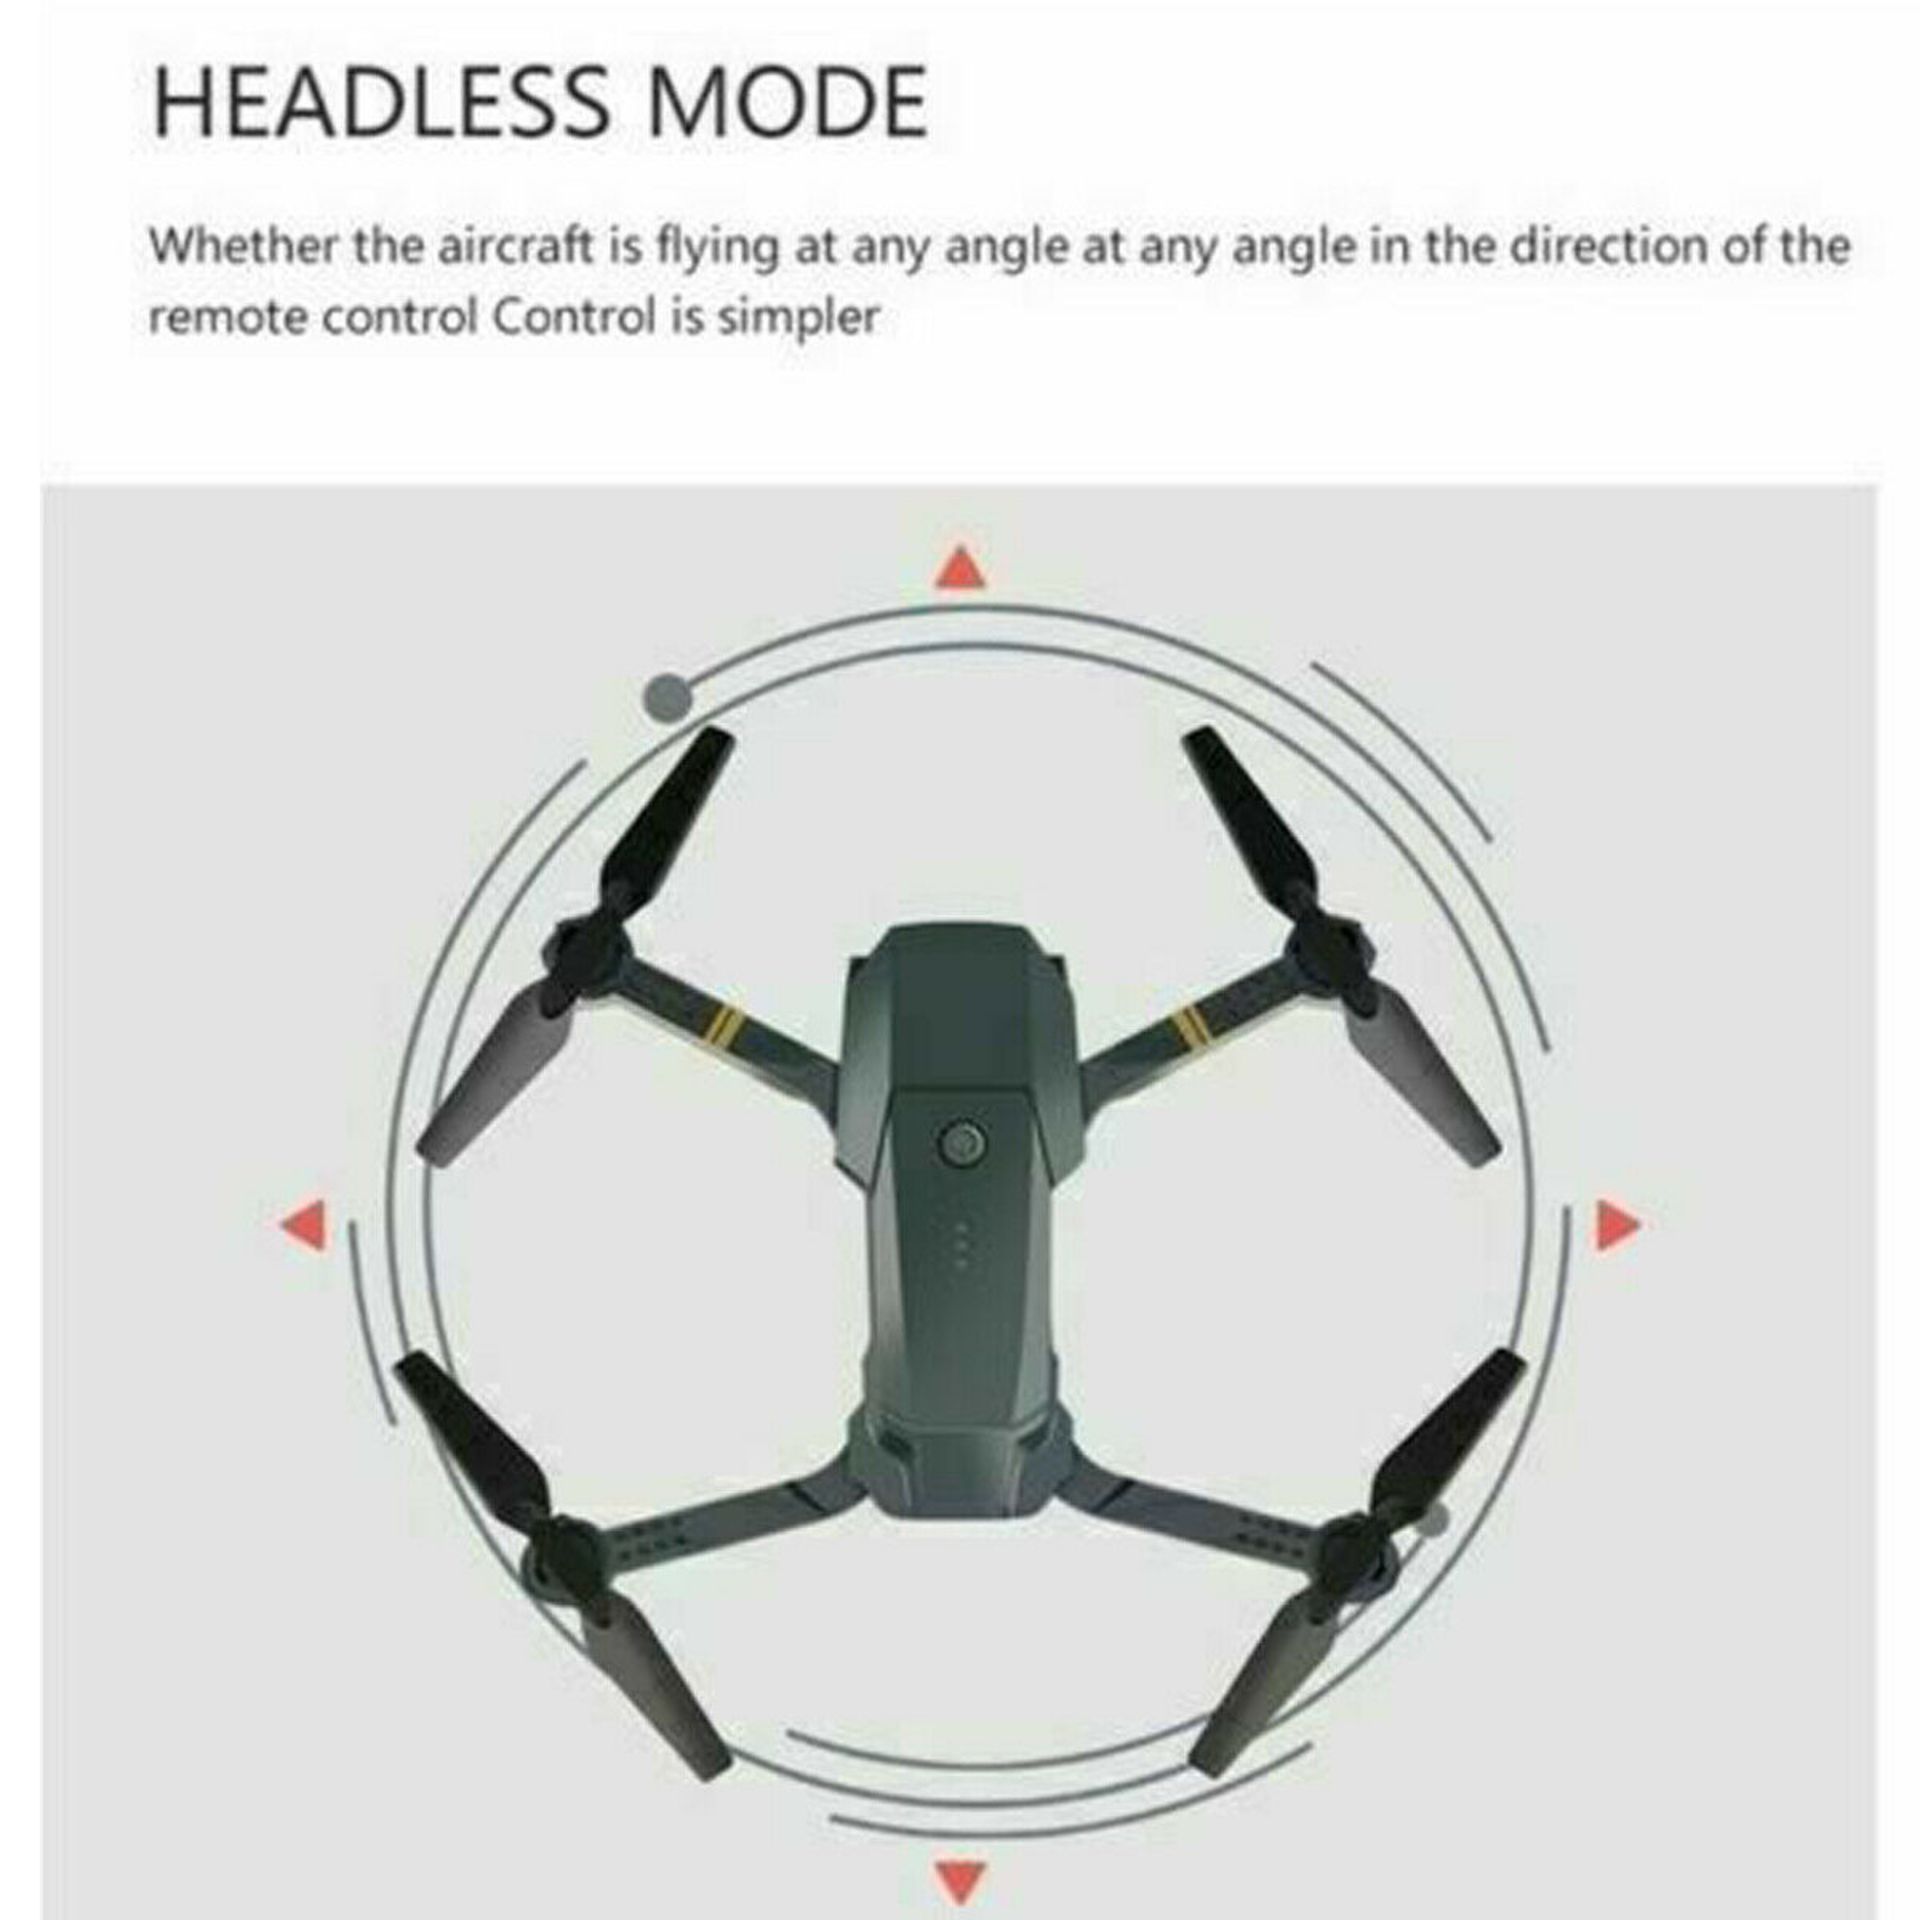 NEW & UNUSED DRONE X PRO WIFI FPV 1080p HD CAMERA FOLDABLE RC QUADCOPTER + CASE/ BAG *NO VAT* - Image 11 of 11